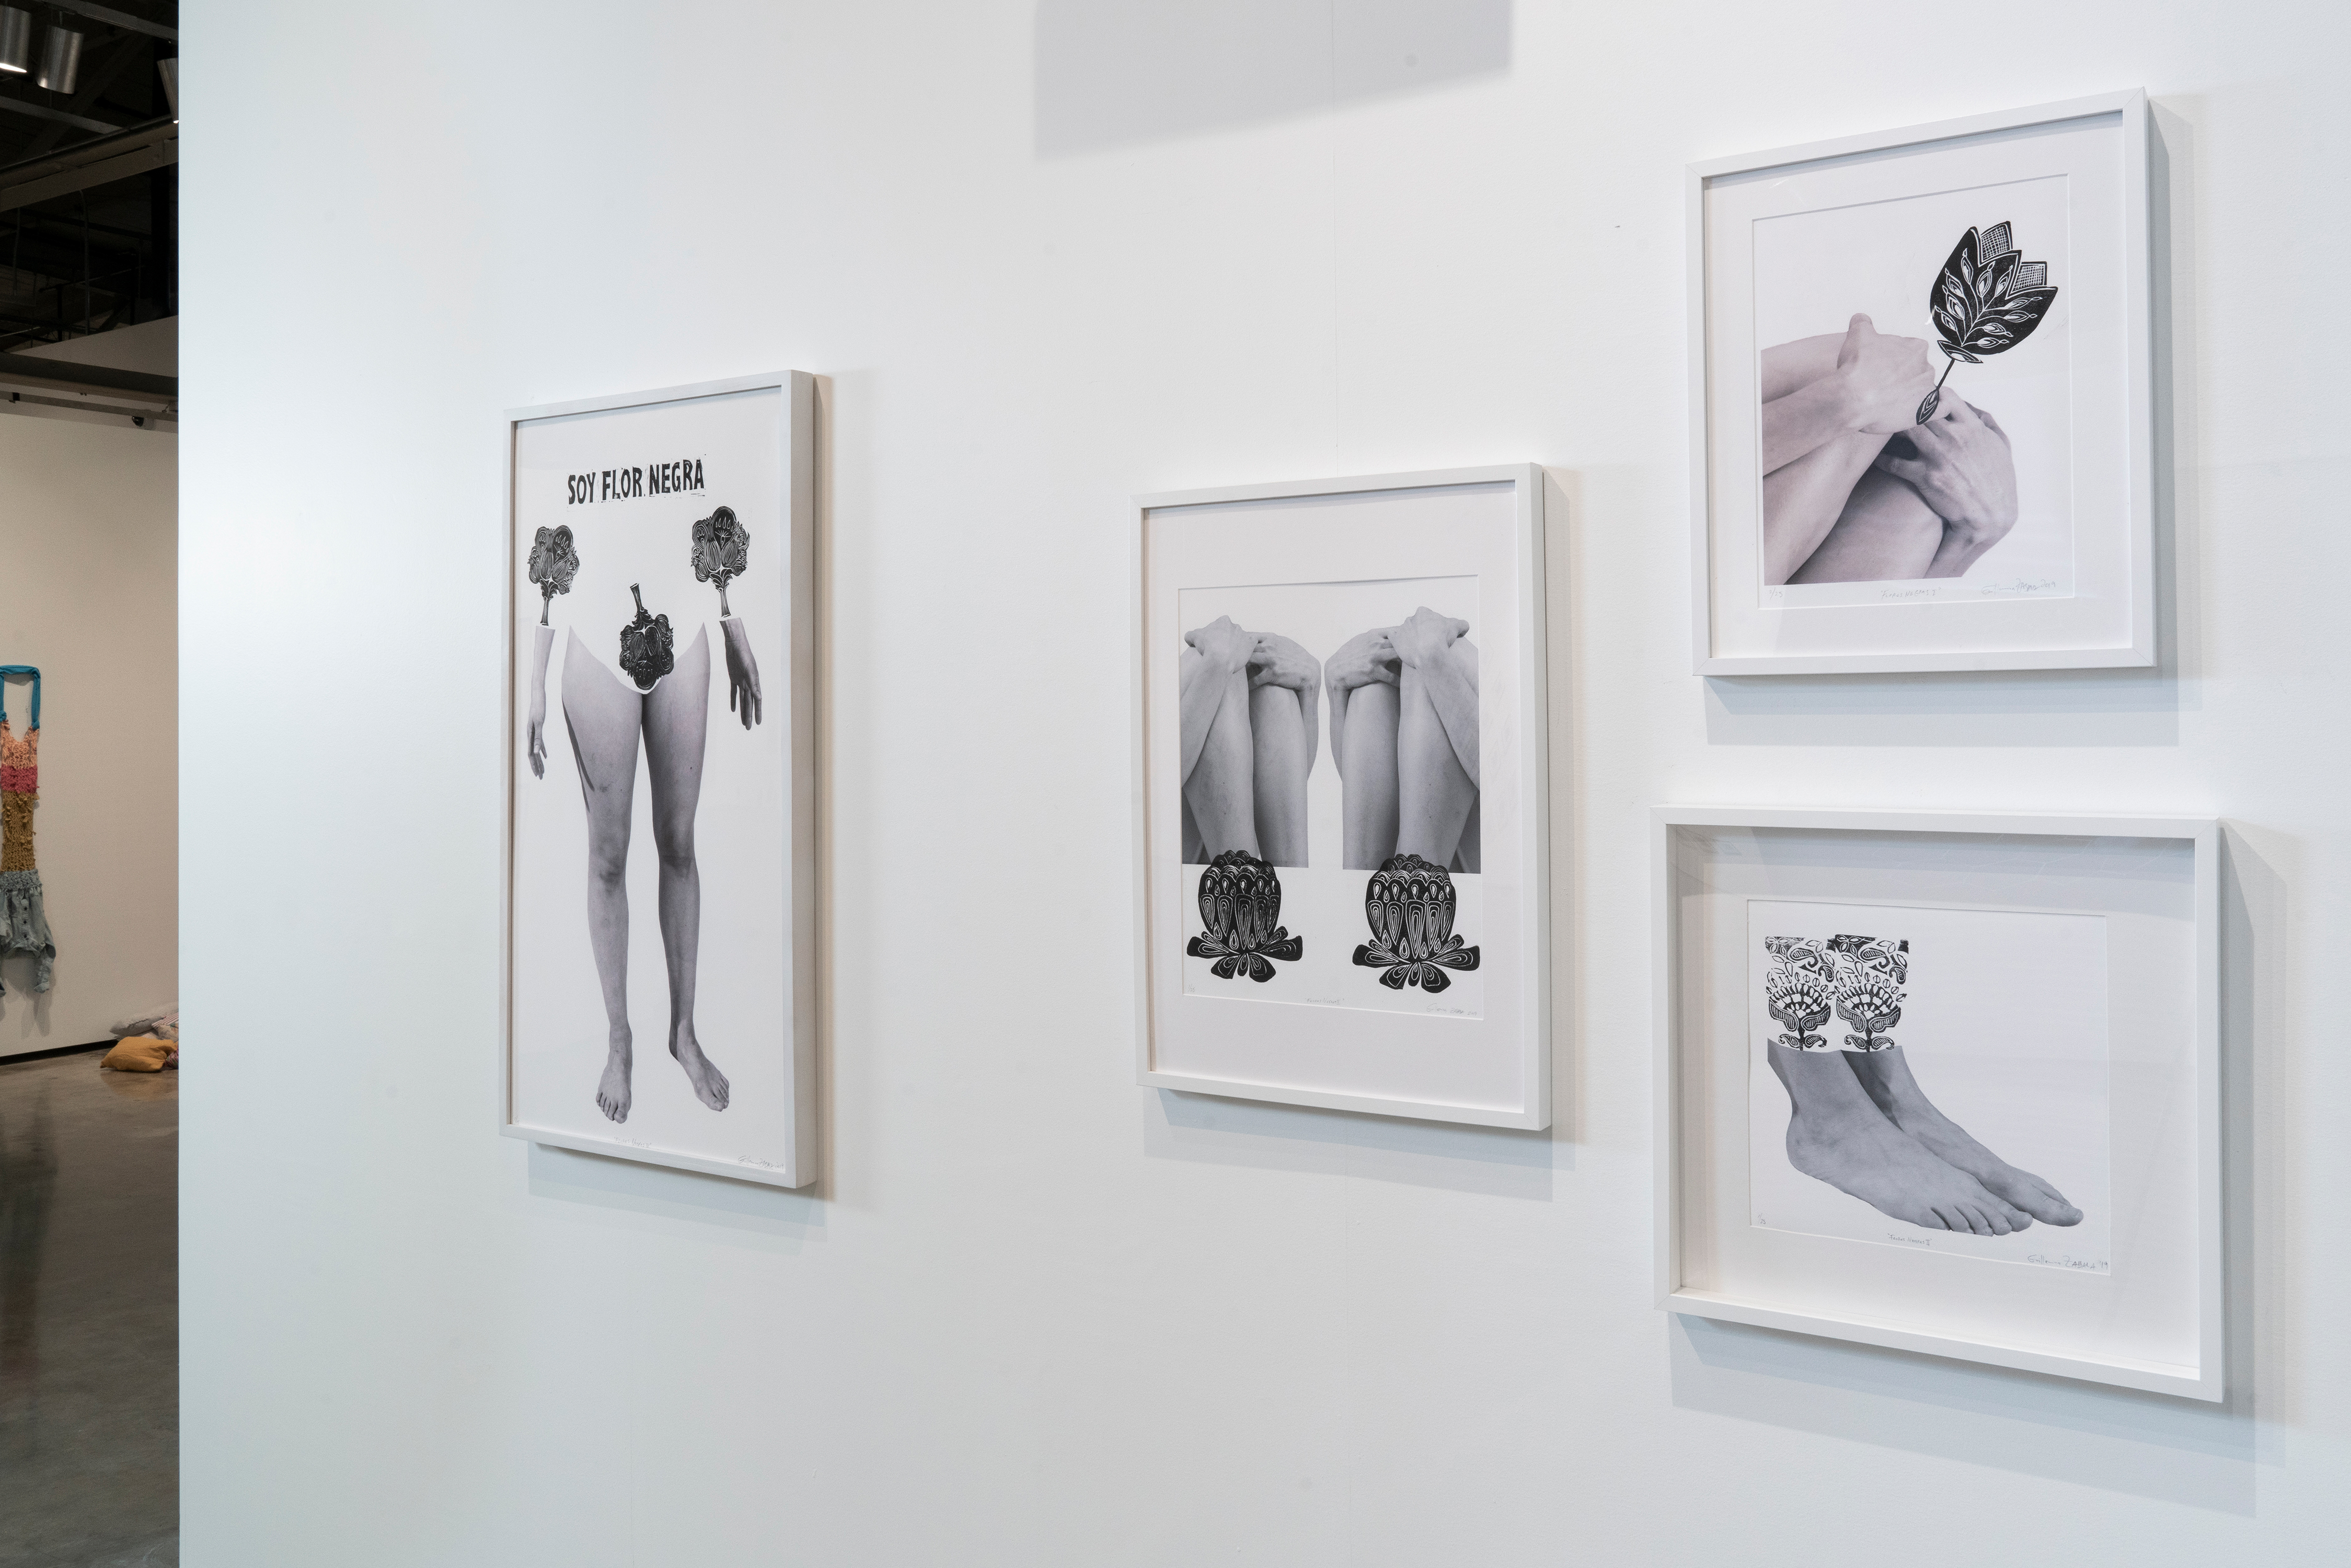 Guillermina Zabala (from left to right), Flores Negras IV, III, I, II, 2019, Archival digital prints on fine art paper with relief print, Dimensions variable